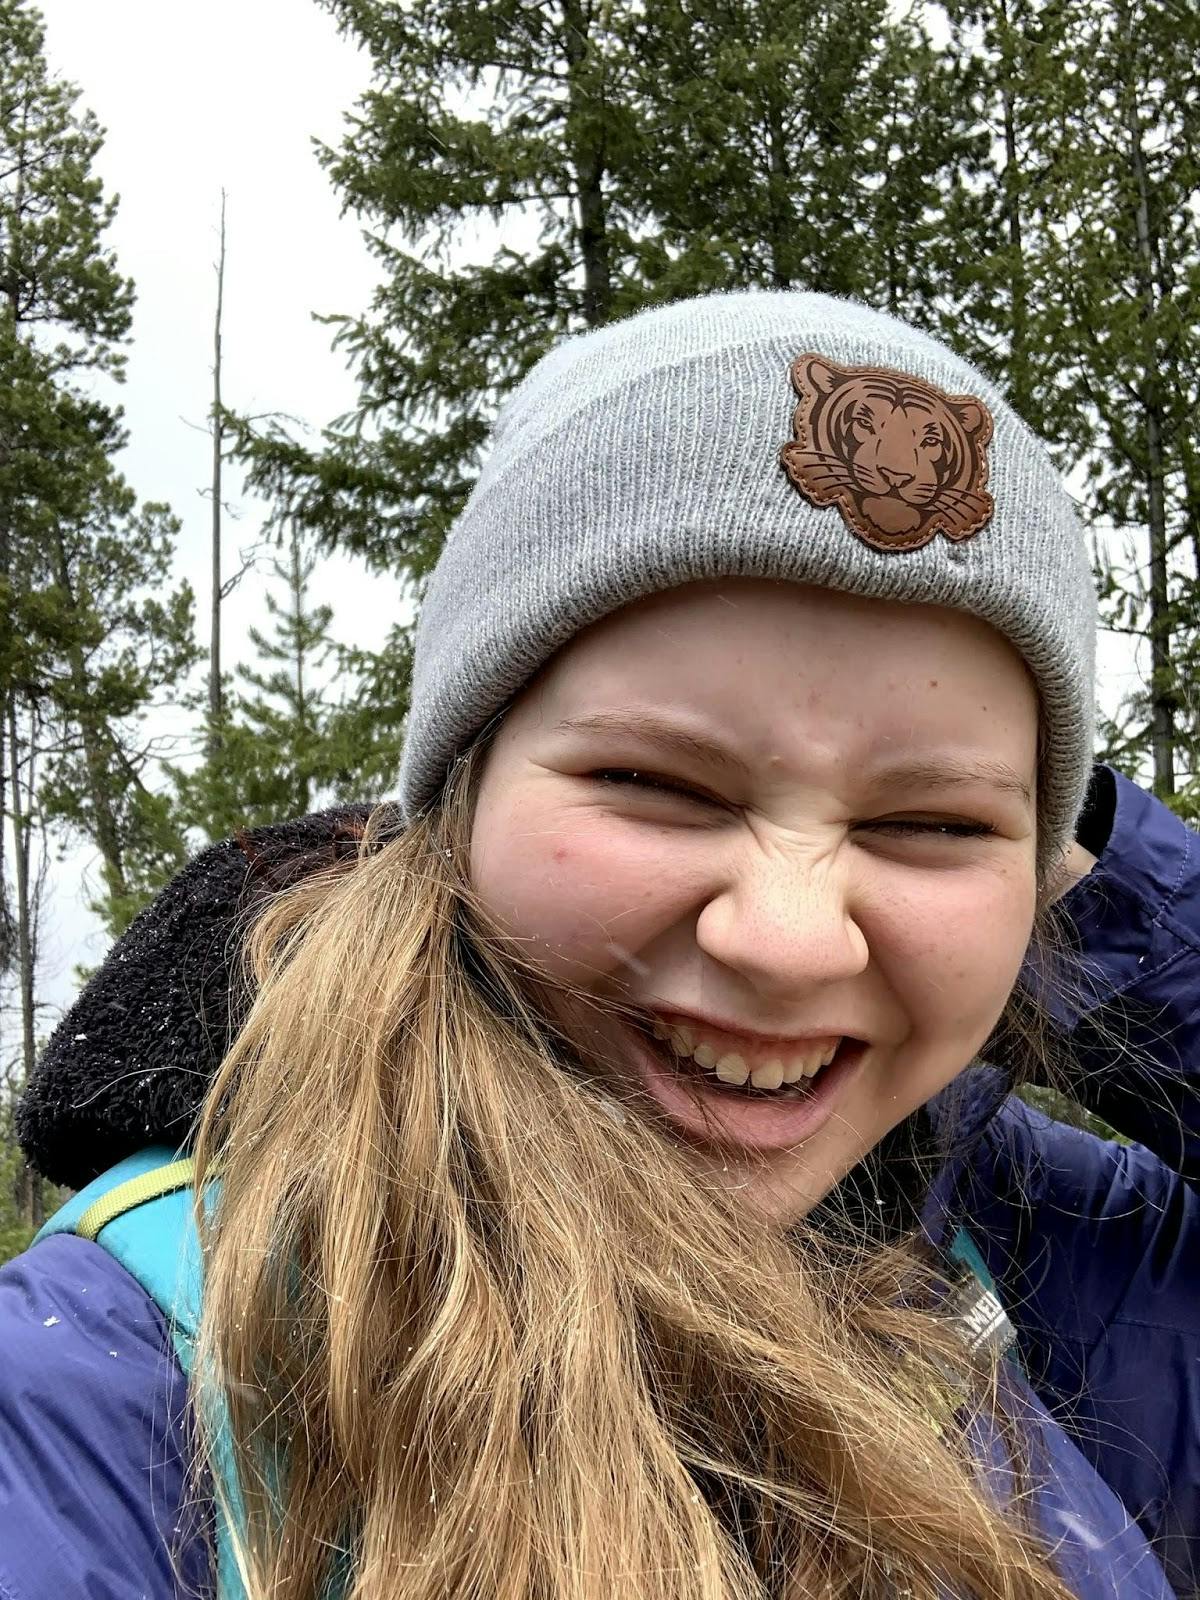 The author takes a selfie, smiling and scrunching up her face while wearing a beanie, rain coat, fleece, and a backpack. 